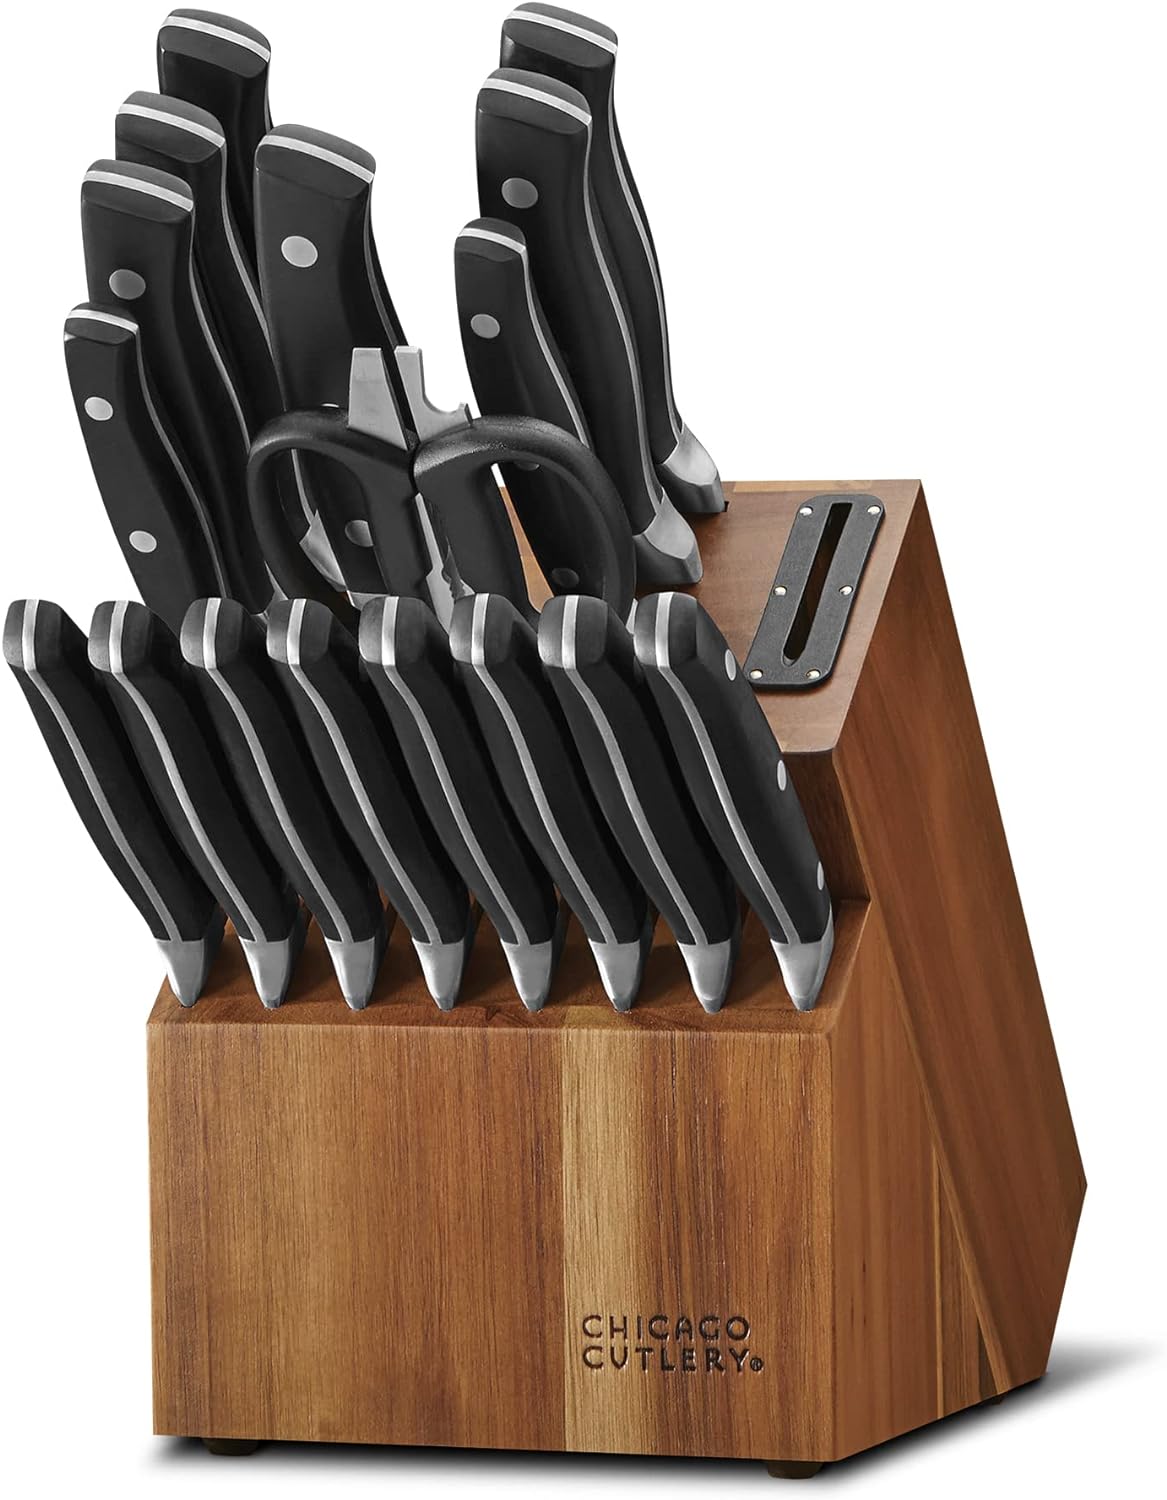 Chicago Cutlery Insignia Triple Rivet Poly (18-PC) Kitchen Knife Block Set Review